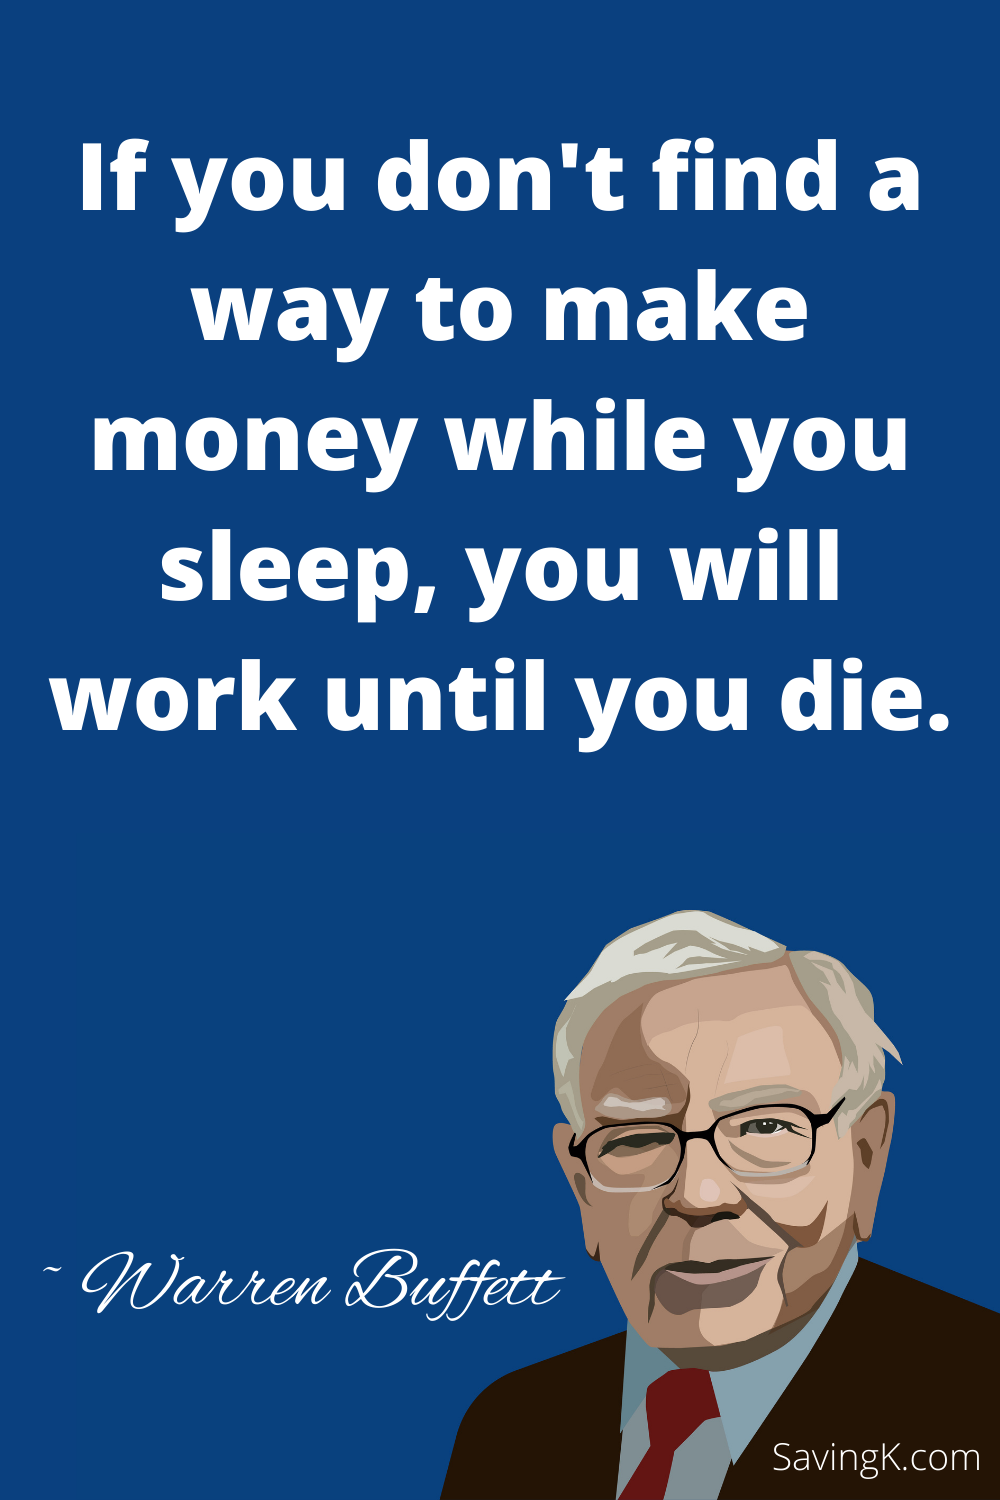 If you don't find a way to make money while you sleep, you will work until you die